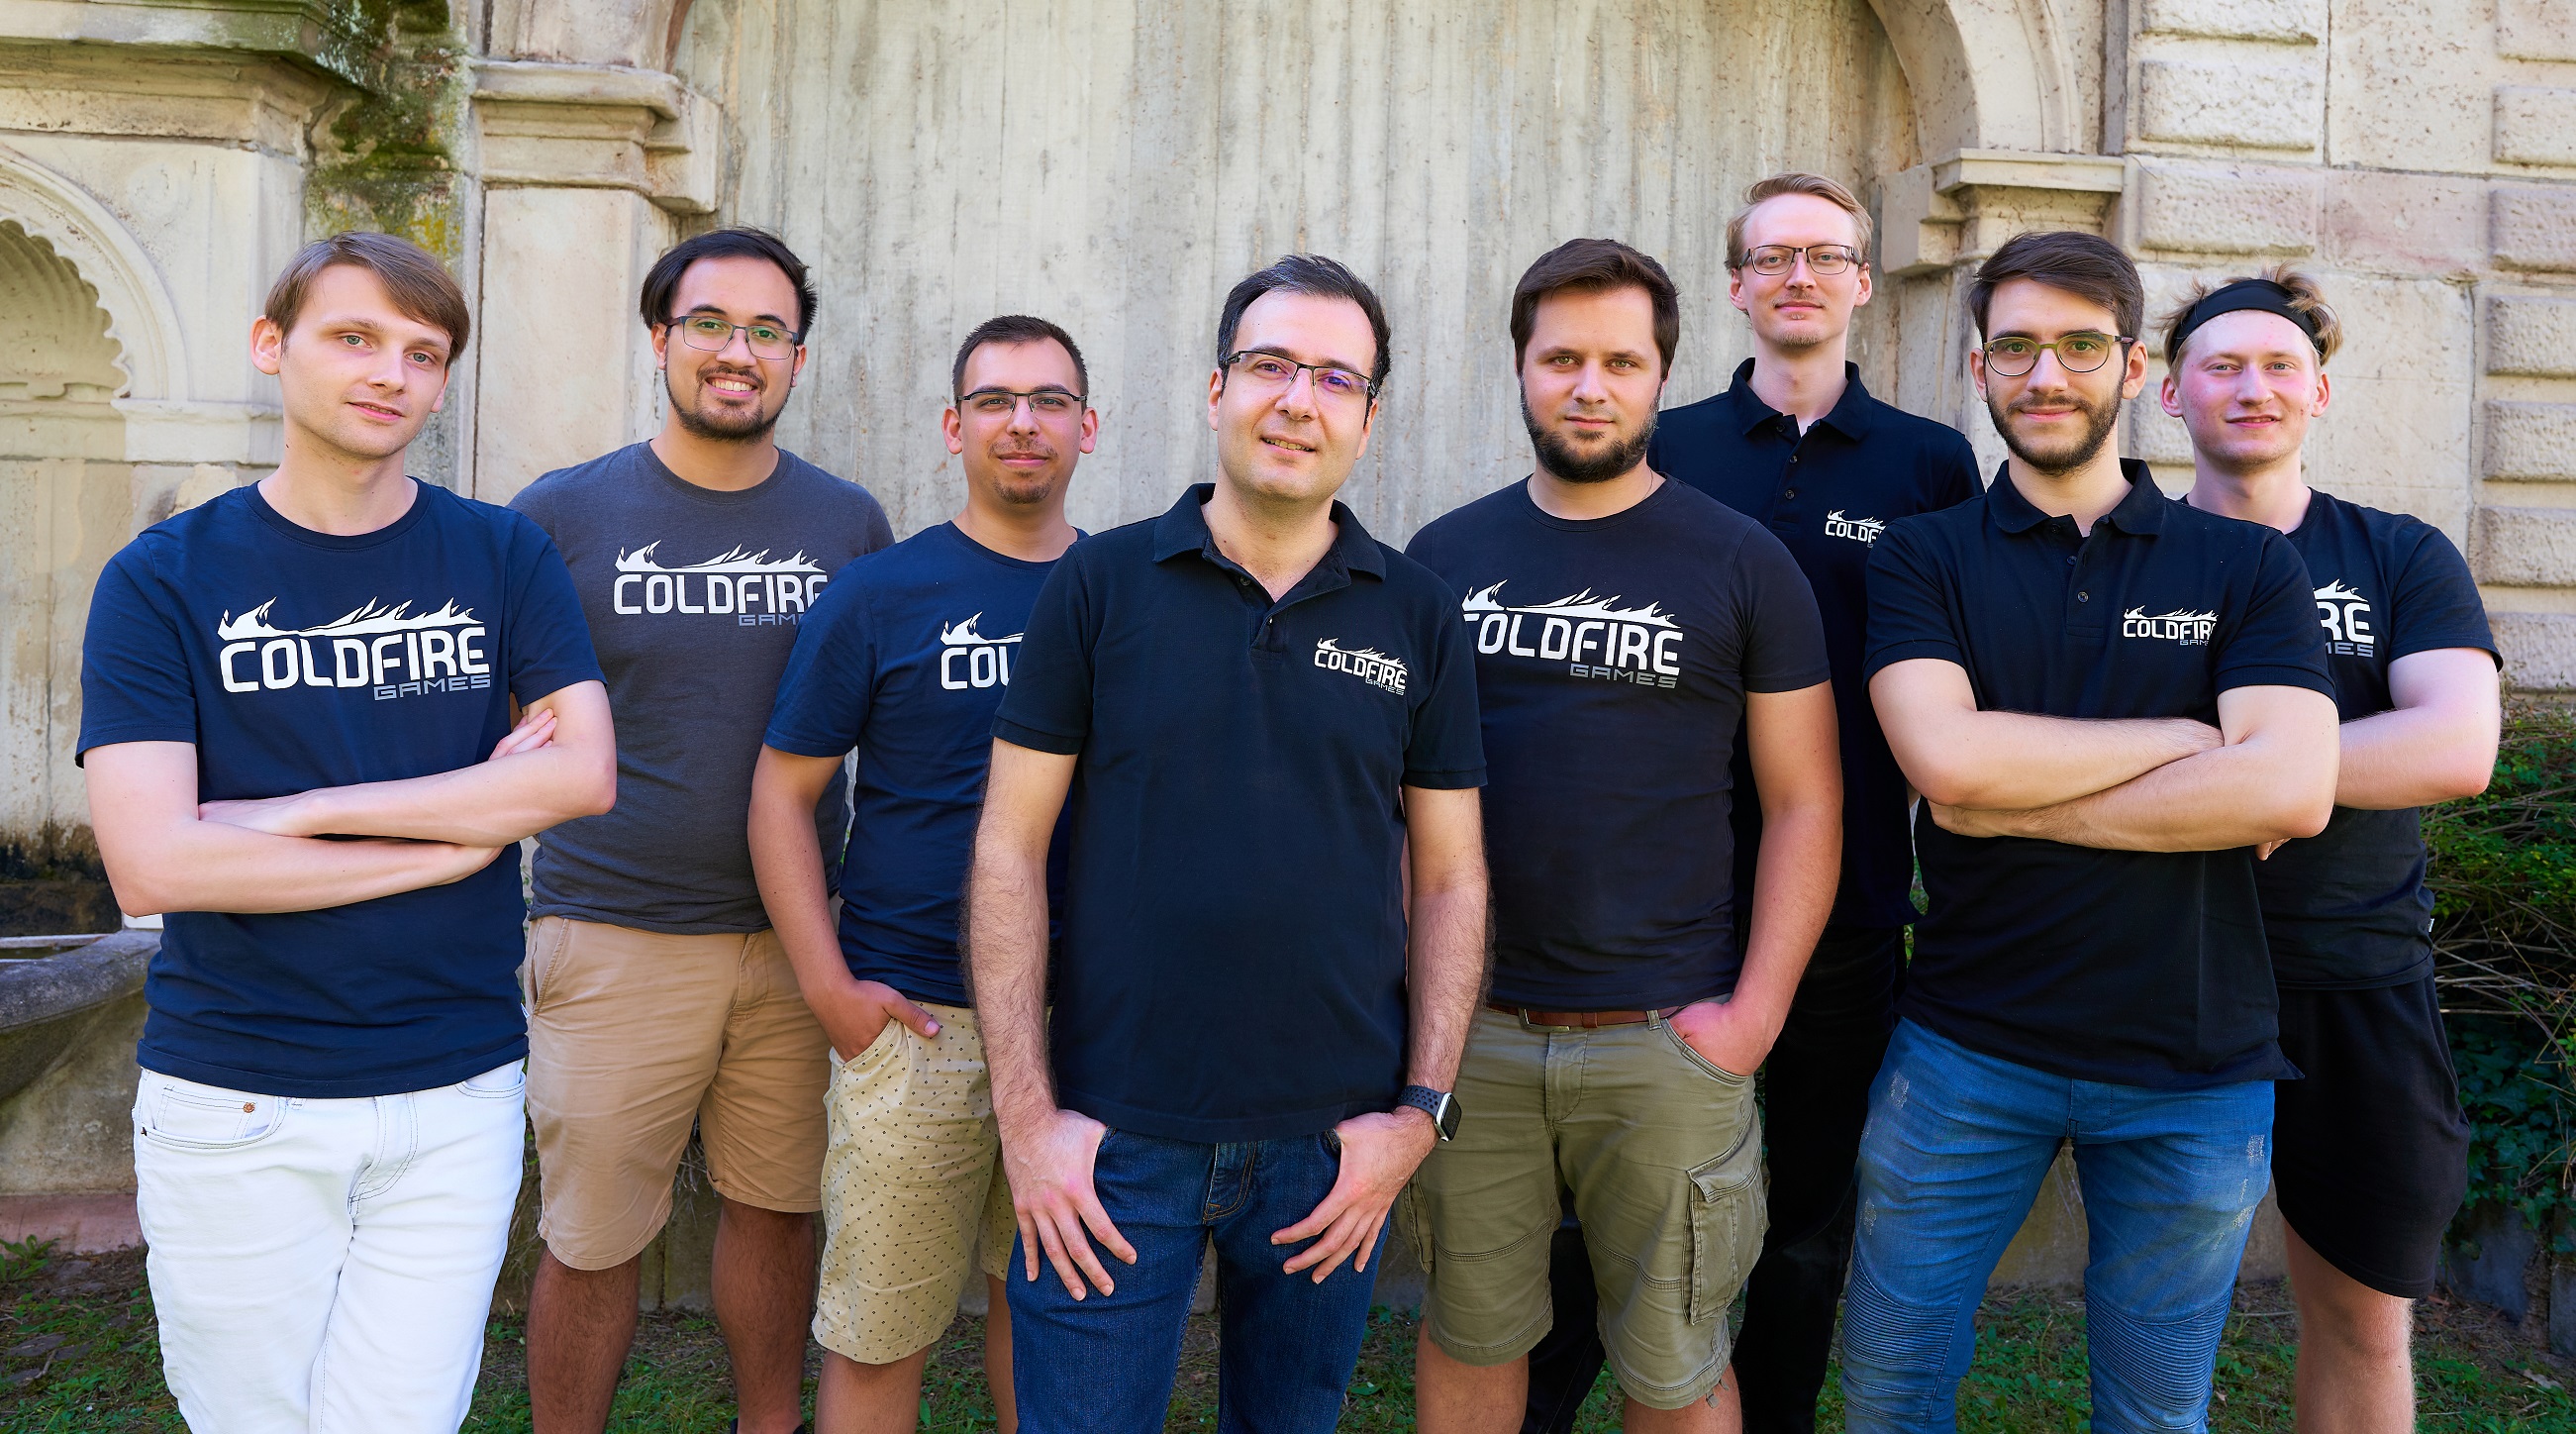 The ColdFire Games Team